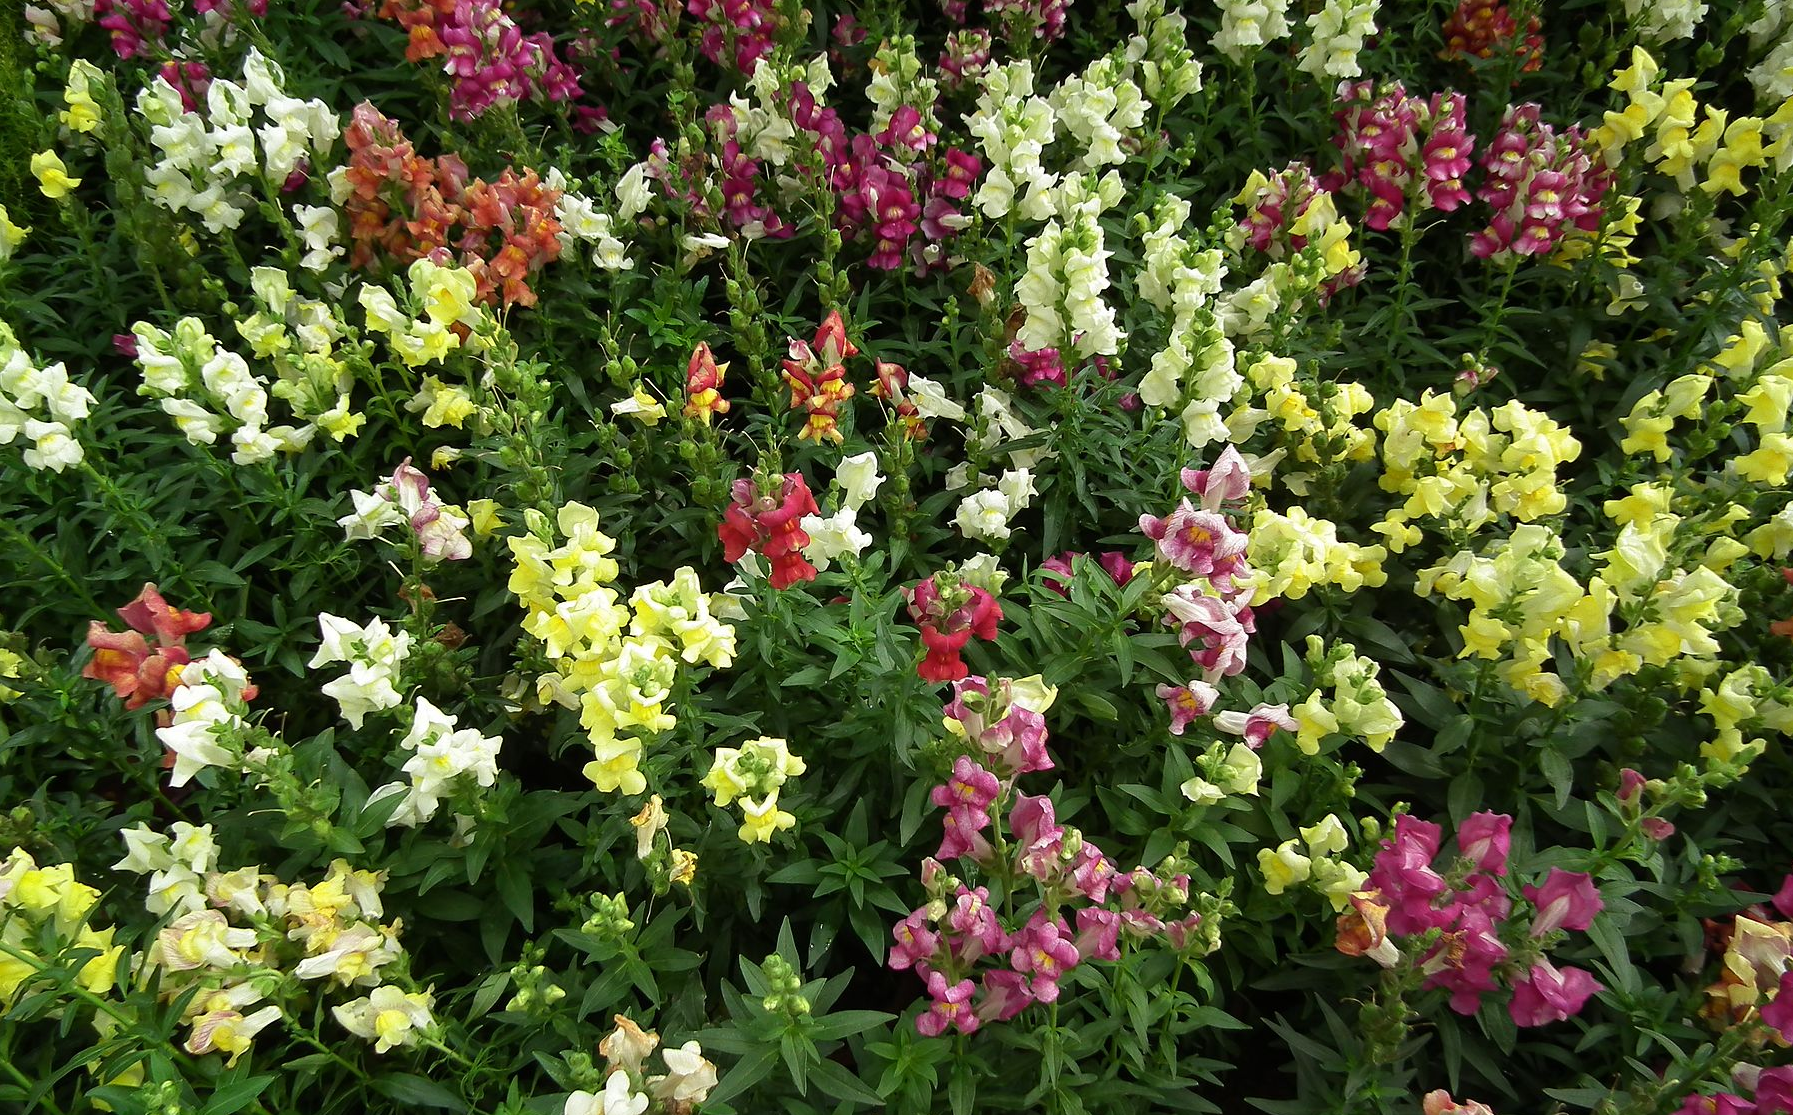 Snapdragon flowers in many hues.